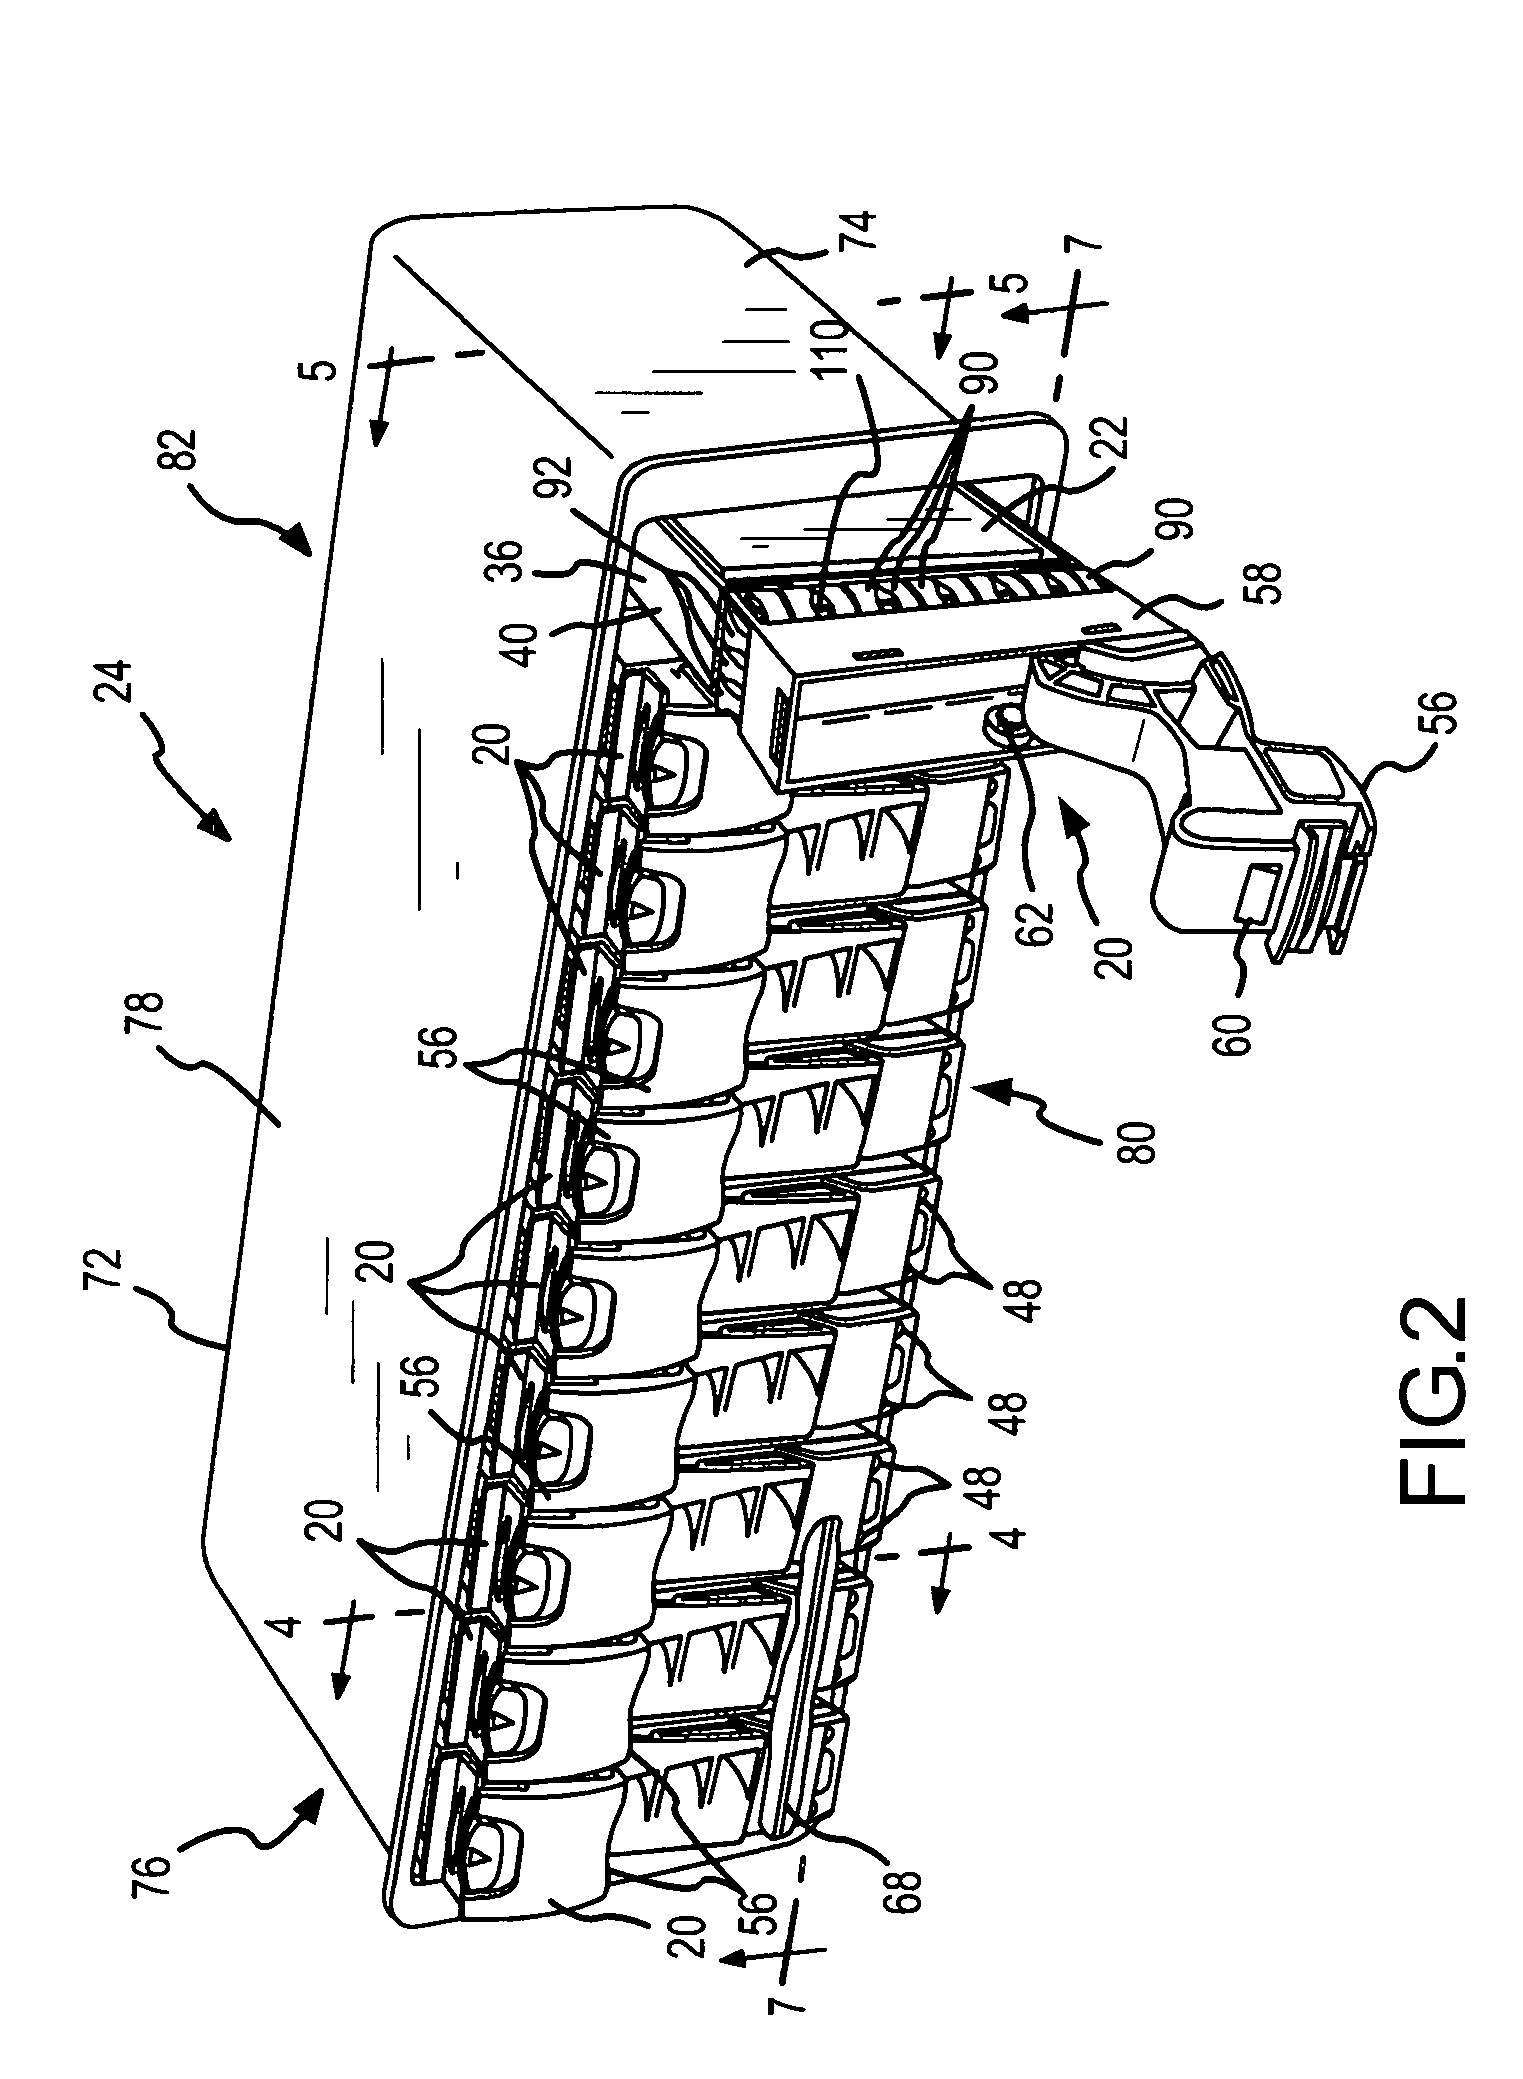 Apparatus and method for inhibiting high-frequency, electromagnetic interference from non-metallic hard disk drive carriers